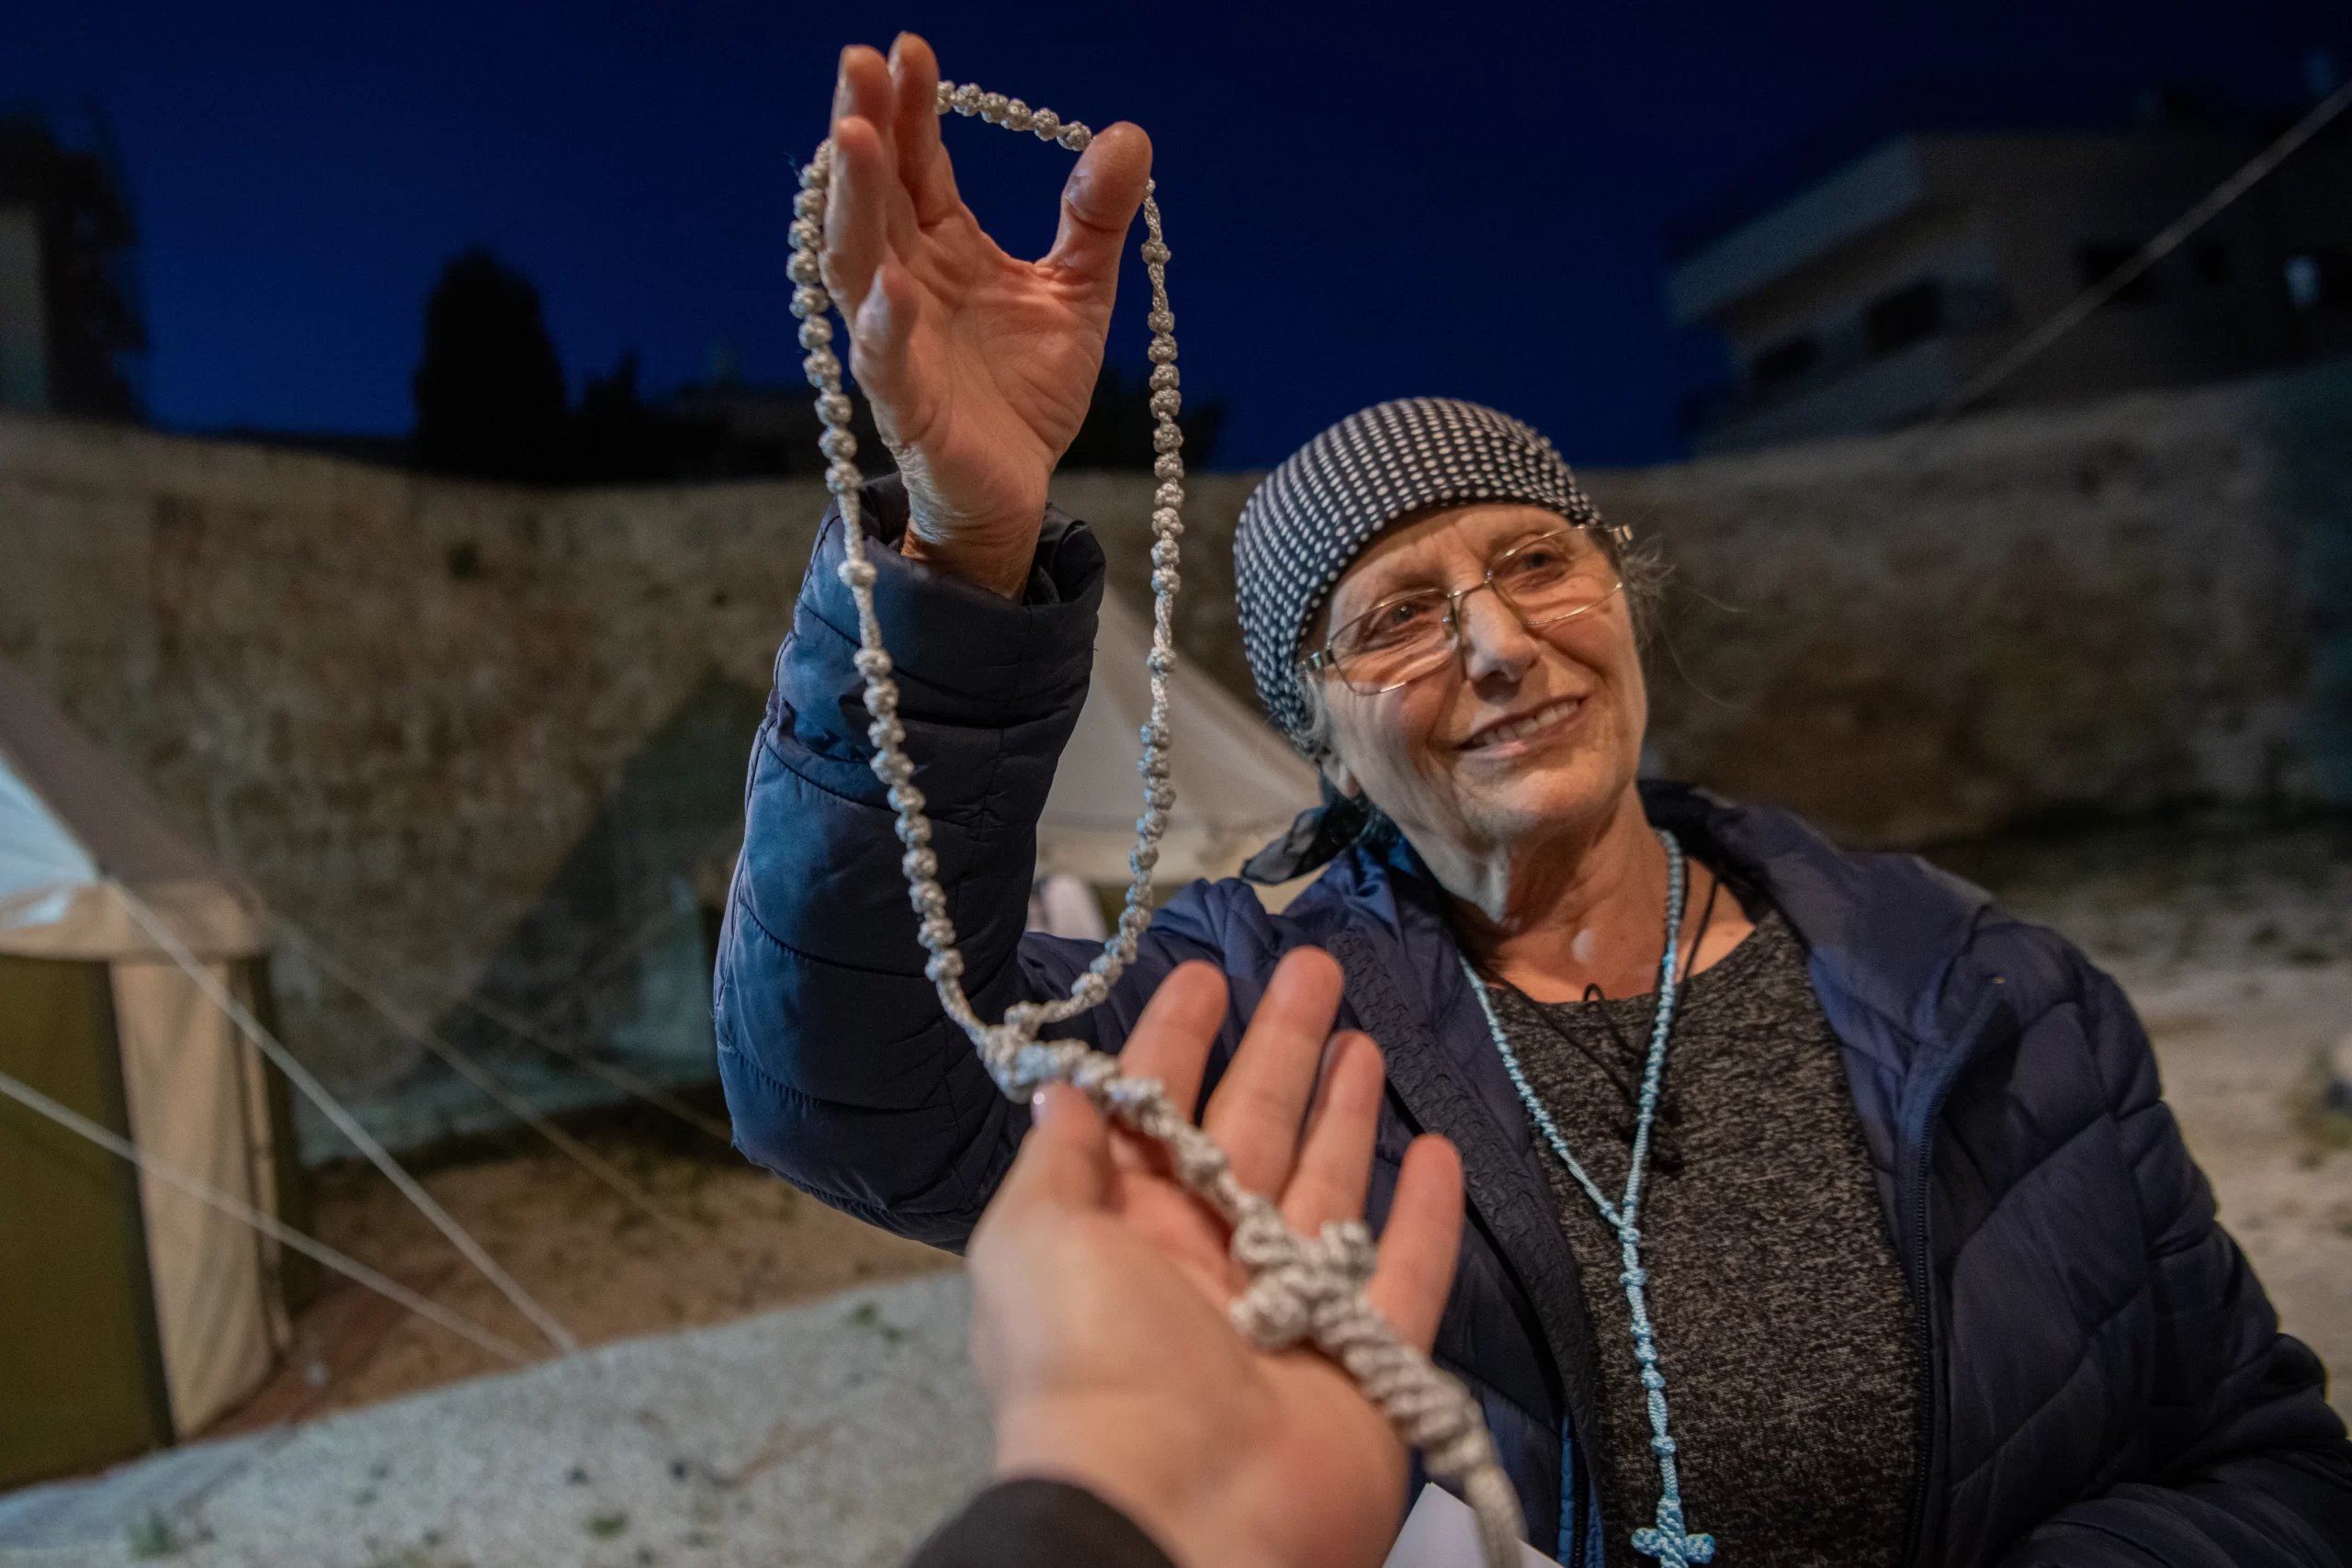 Emily Turjman, a well-known figure in the Latin parish of Jerusalem, outside the Chapel of the Ascension on the Mount of Olives in Jerusalem. She's showing the rosaries she crafts with embroidery, before the vespers of the Ascension solemnity on May 8, 2024, organized by the parish. “I come here every year,” she told CNA. “I love the Lord and want to be close to him,” she said. Credit: Marinella Bandini